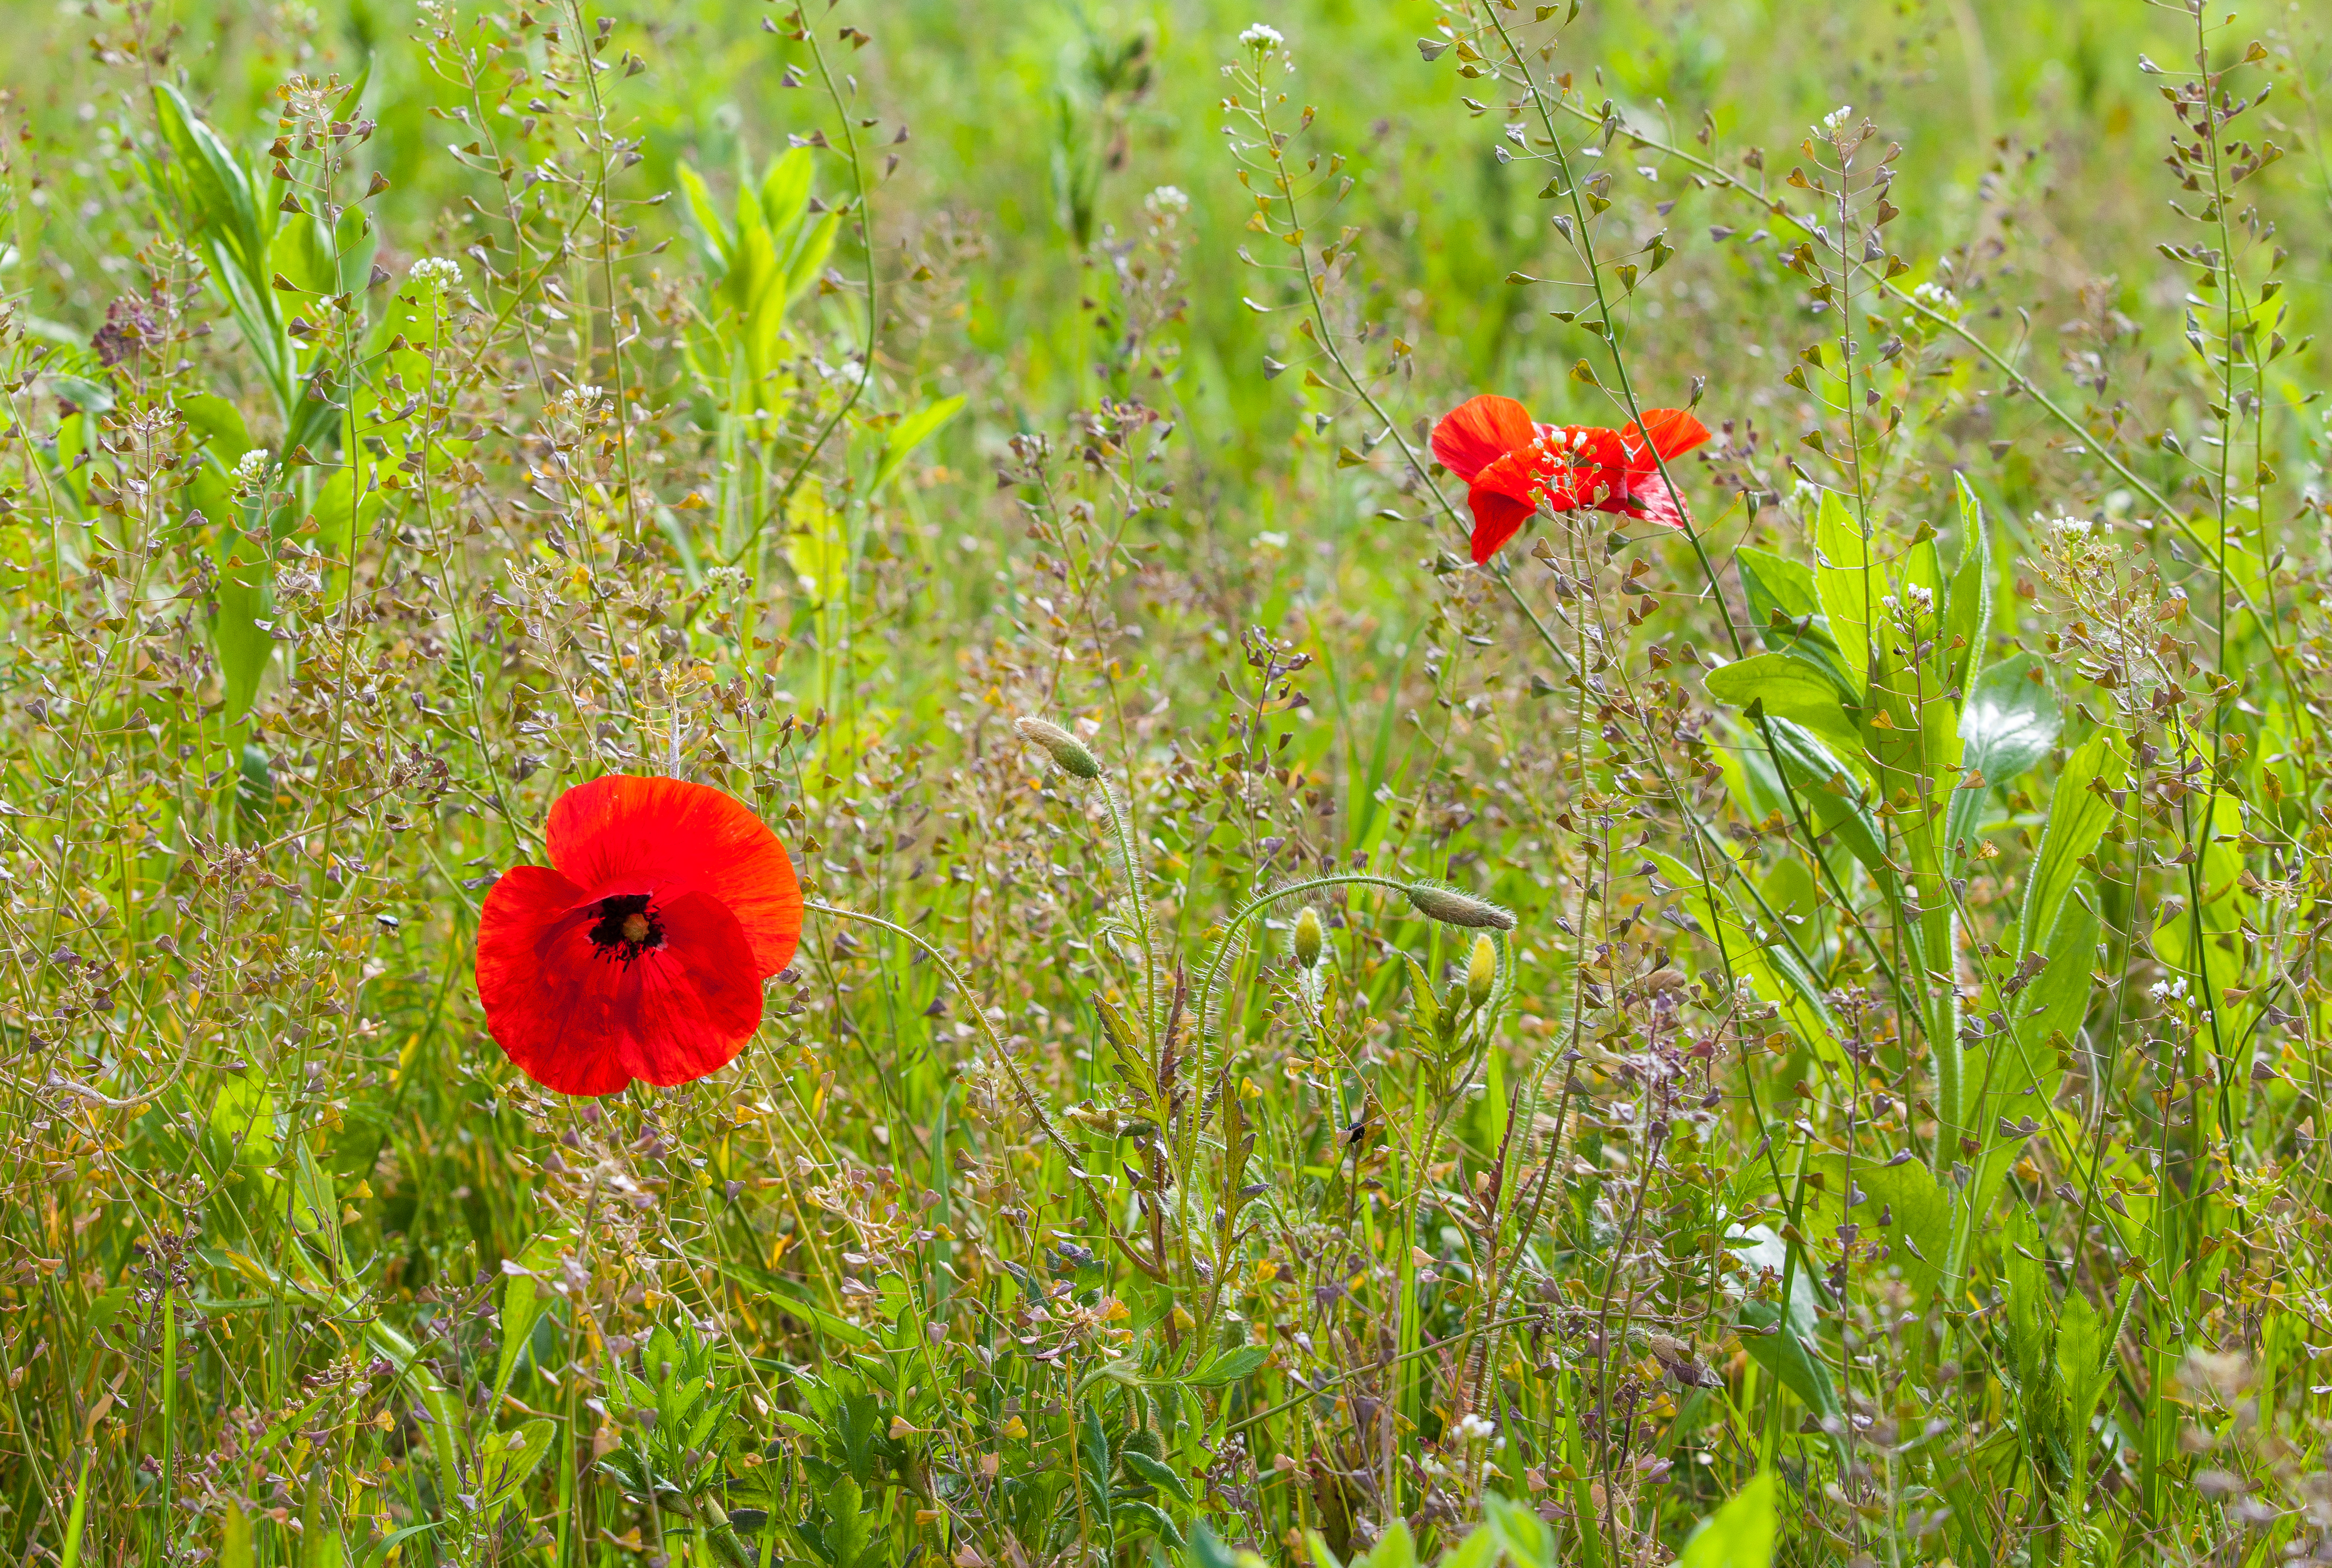 poppies on a field photographed in May 2014 in Ukraine